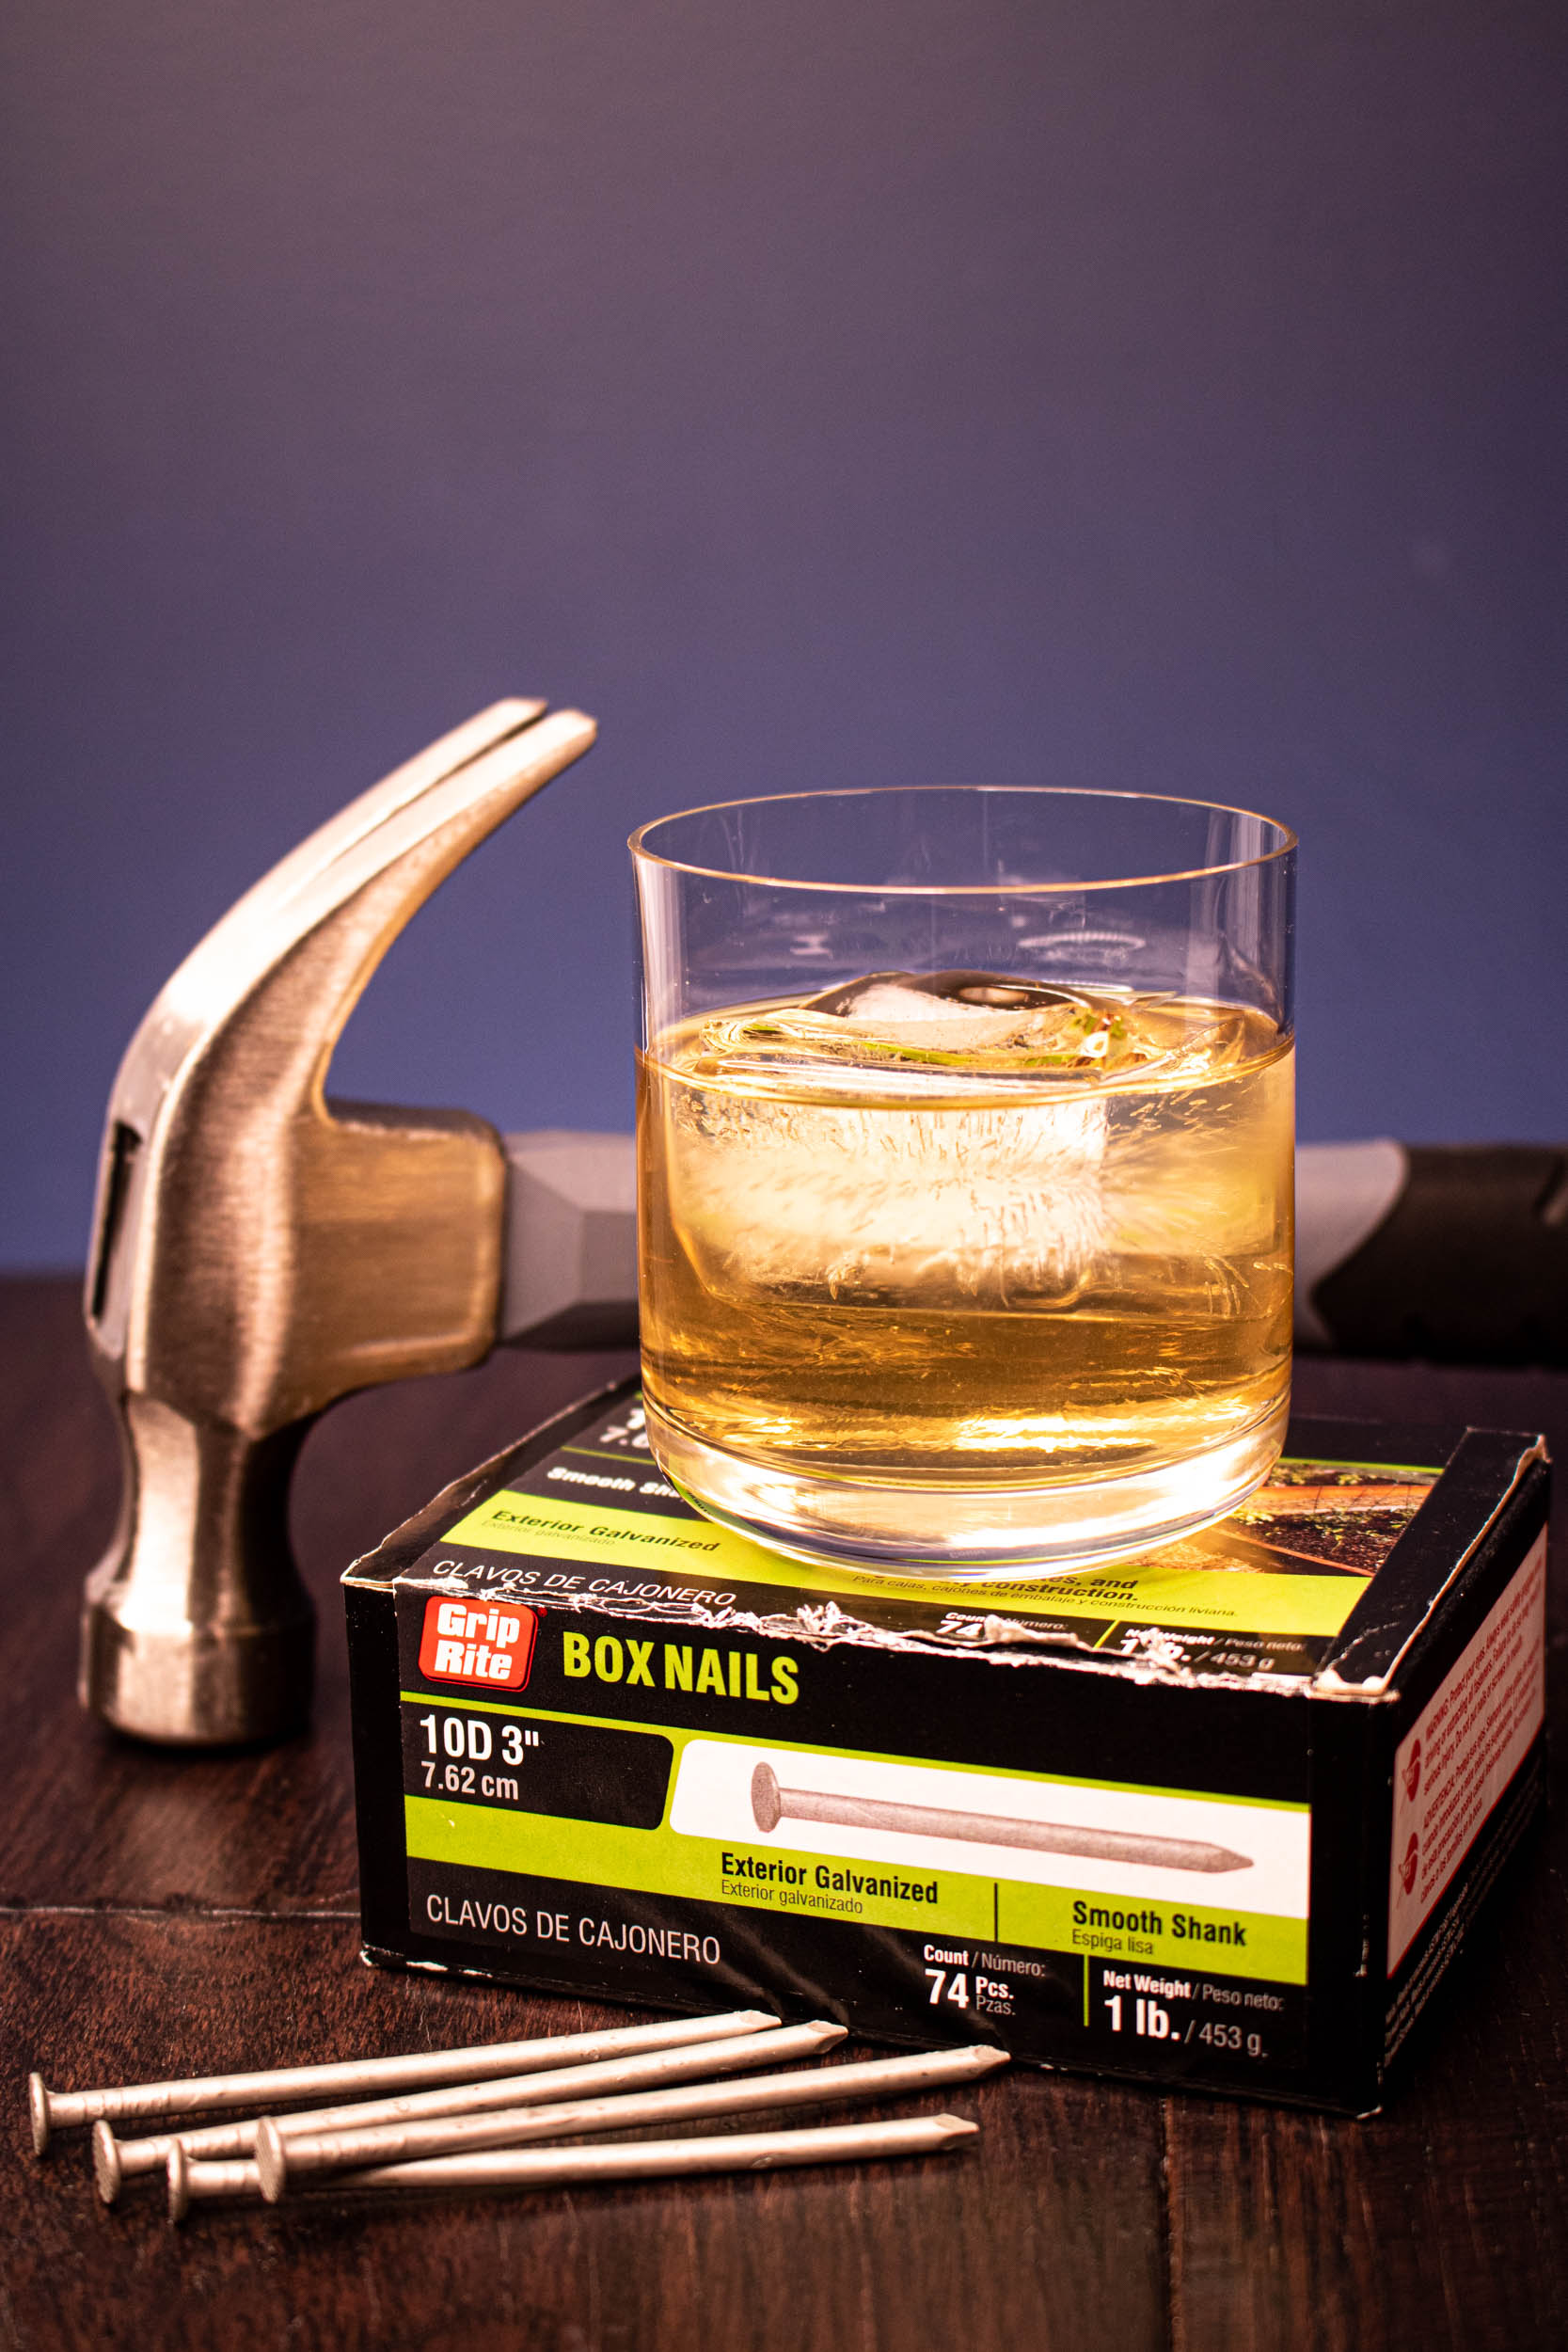 Rusty Nail Cocktail